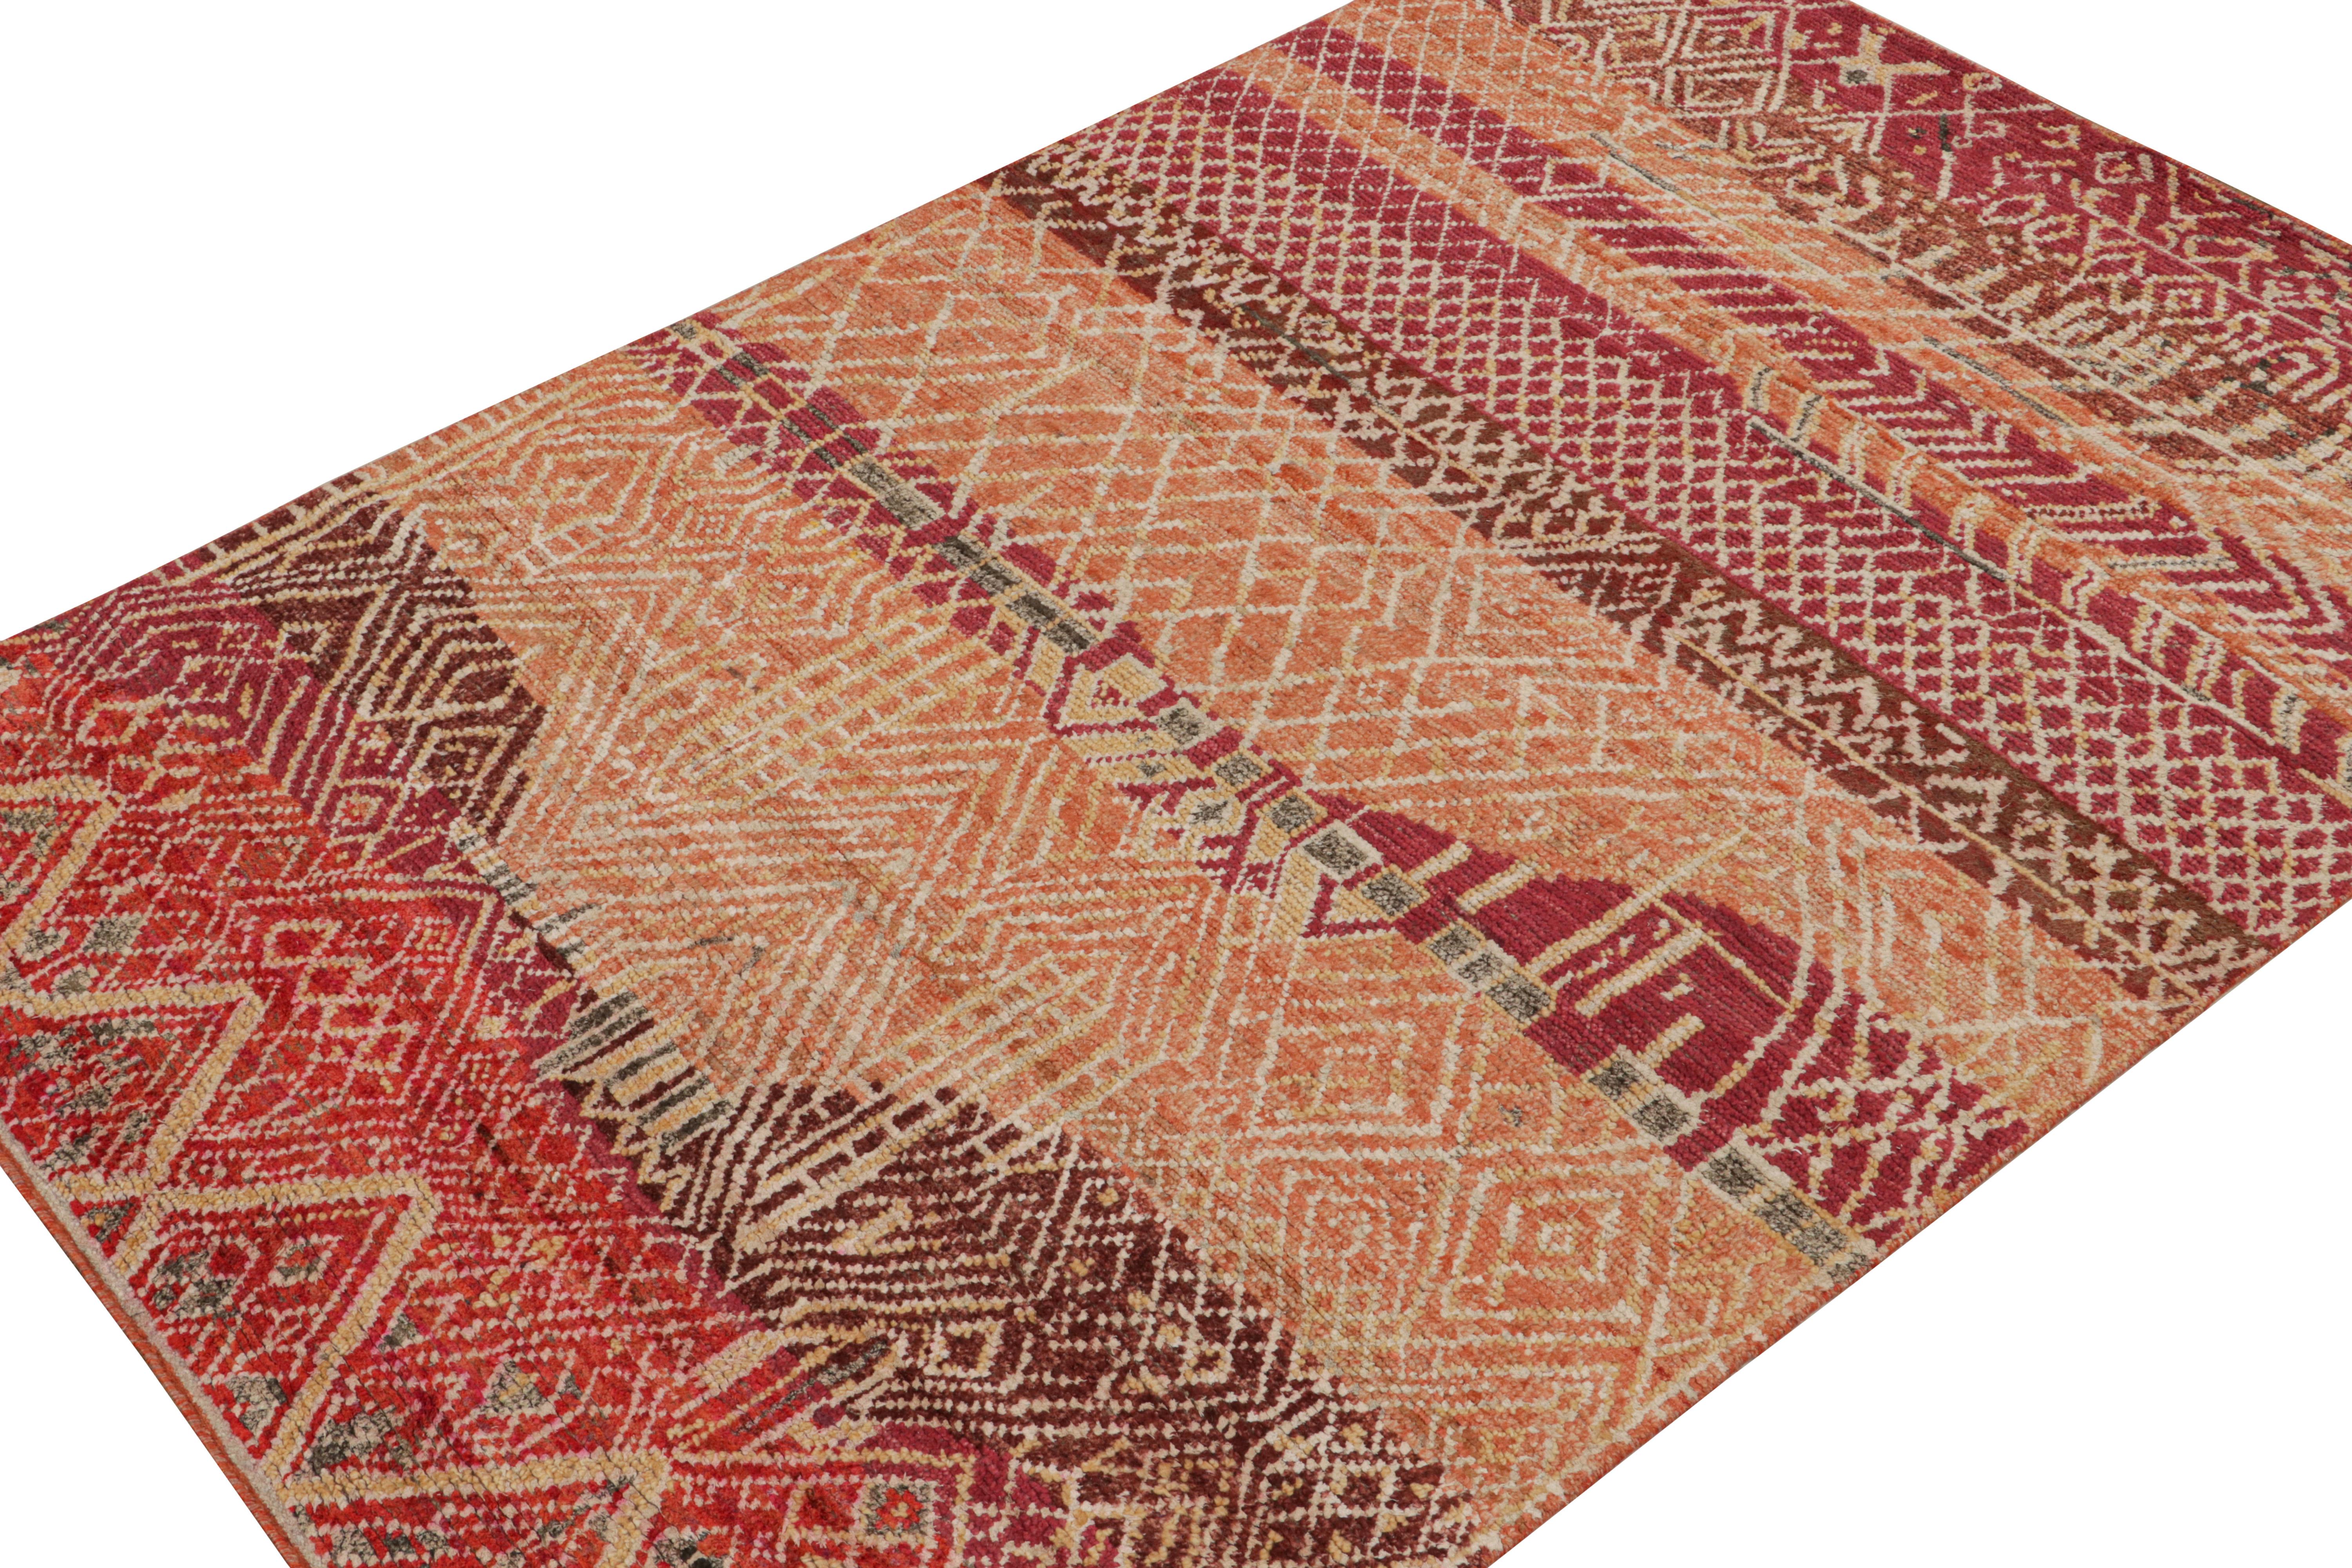 Hand-knotted in wool, silk & cotton, this 6x9 rug is a new addition to the Moroccan rug collection by Rug & Kilim. 

On the Design:

This rug enjoys primitivist style with patterns in tones of red, orange & white. Connoisseurs will admire this as a